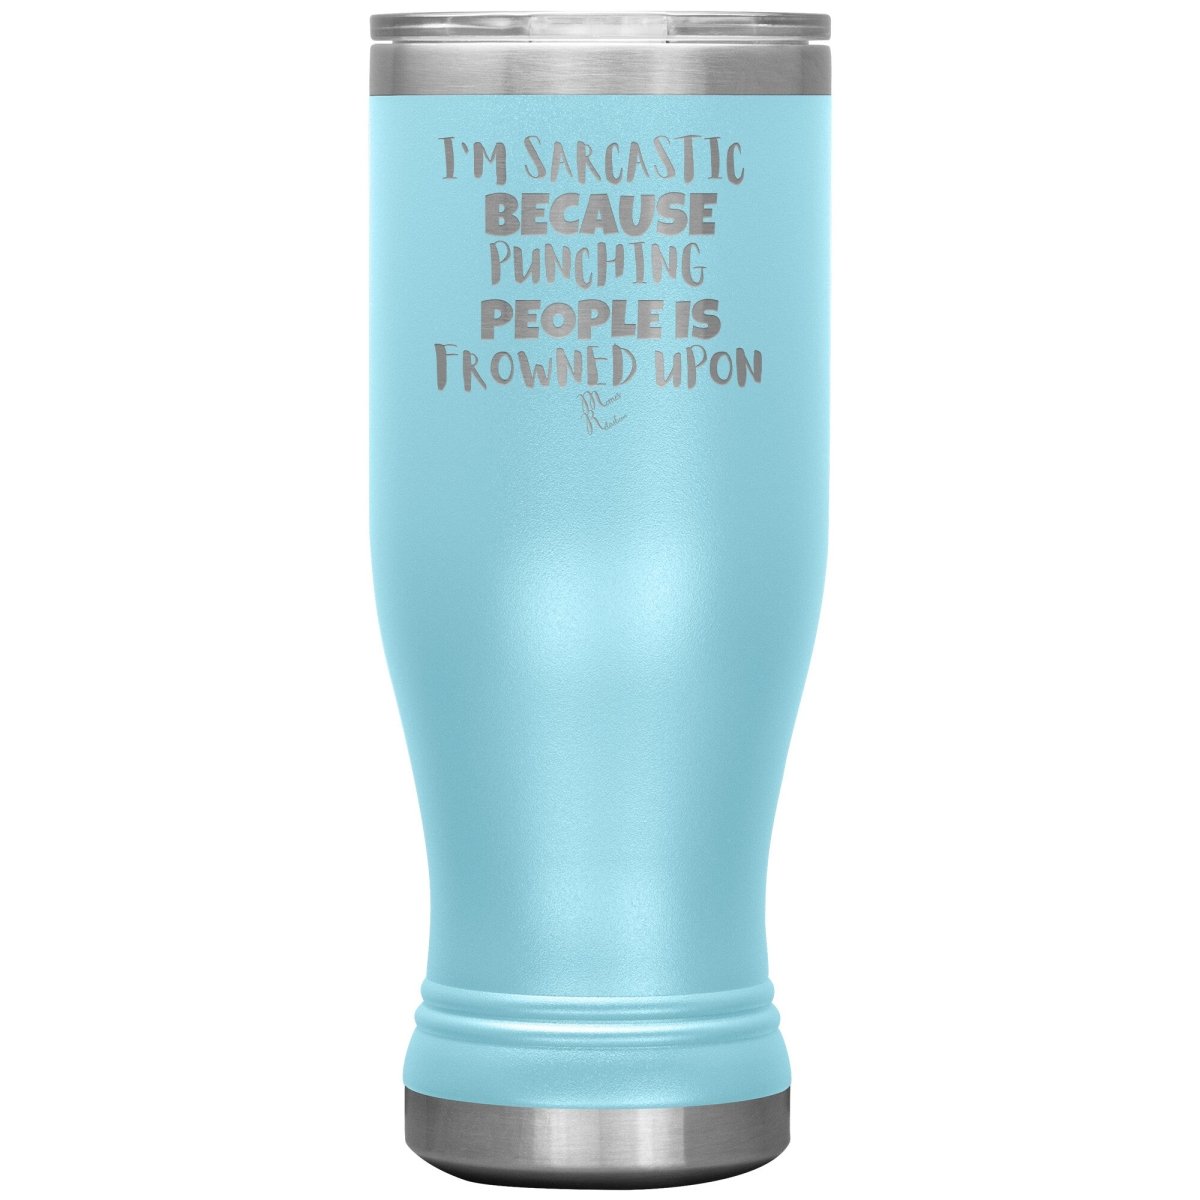 I'm Sarcastic Because Punching People is Frowned Upon Tumblers, 20oz BOHO Insulated Tumbler / Light Blue - MemesRetail.com